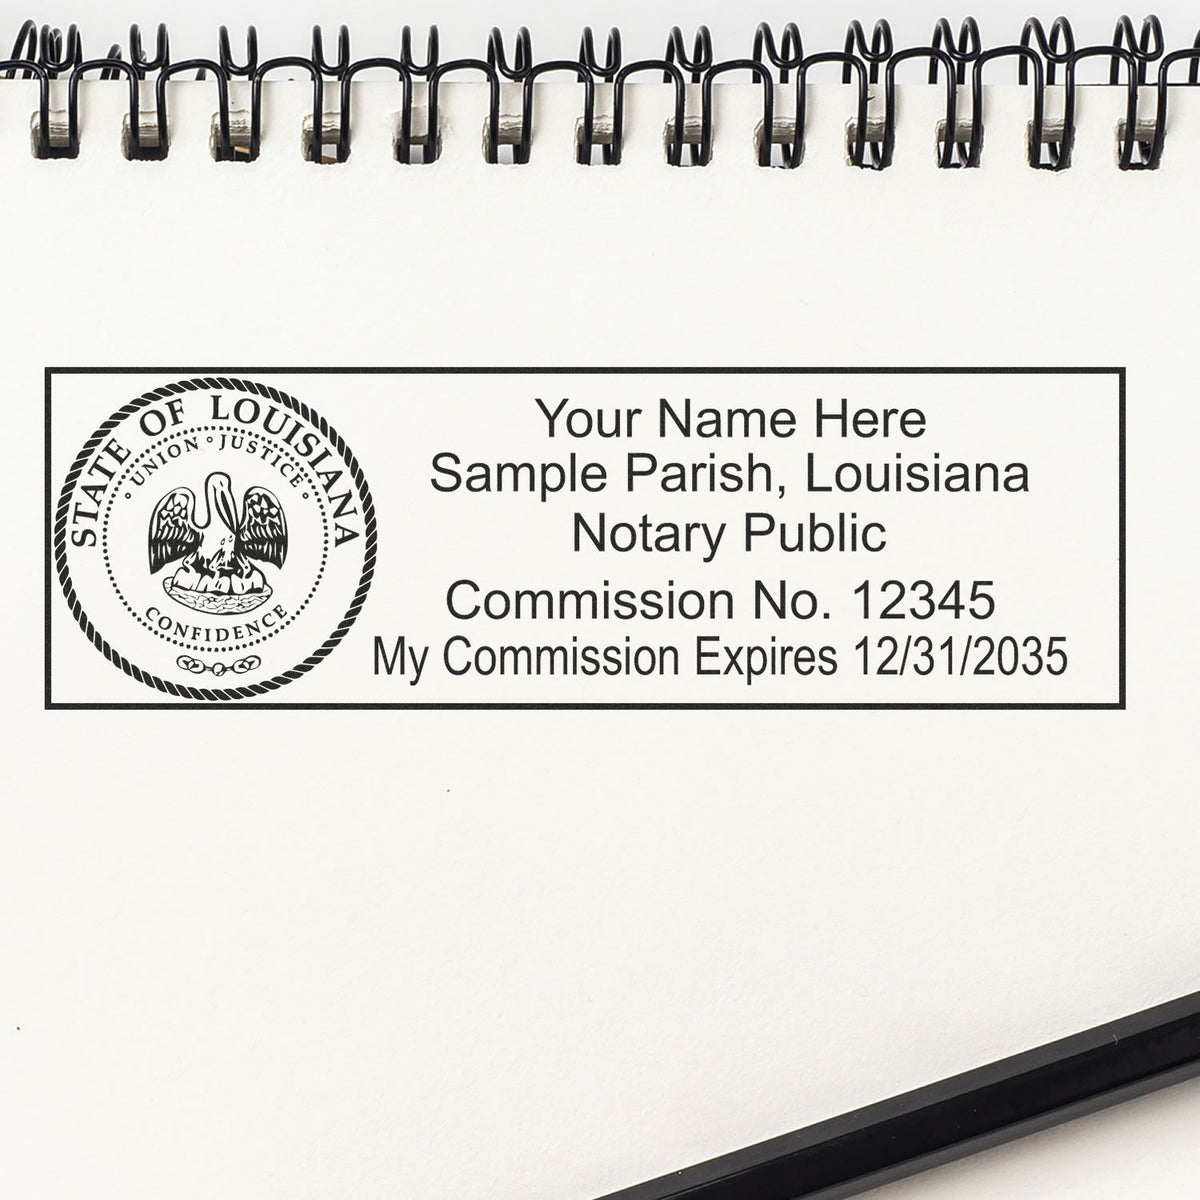 A lifestyle photo showing a stamped image of the Heavy-Duty Louisiana Rectangular Notary Stamp on a piece of paper